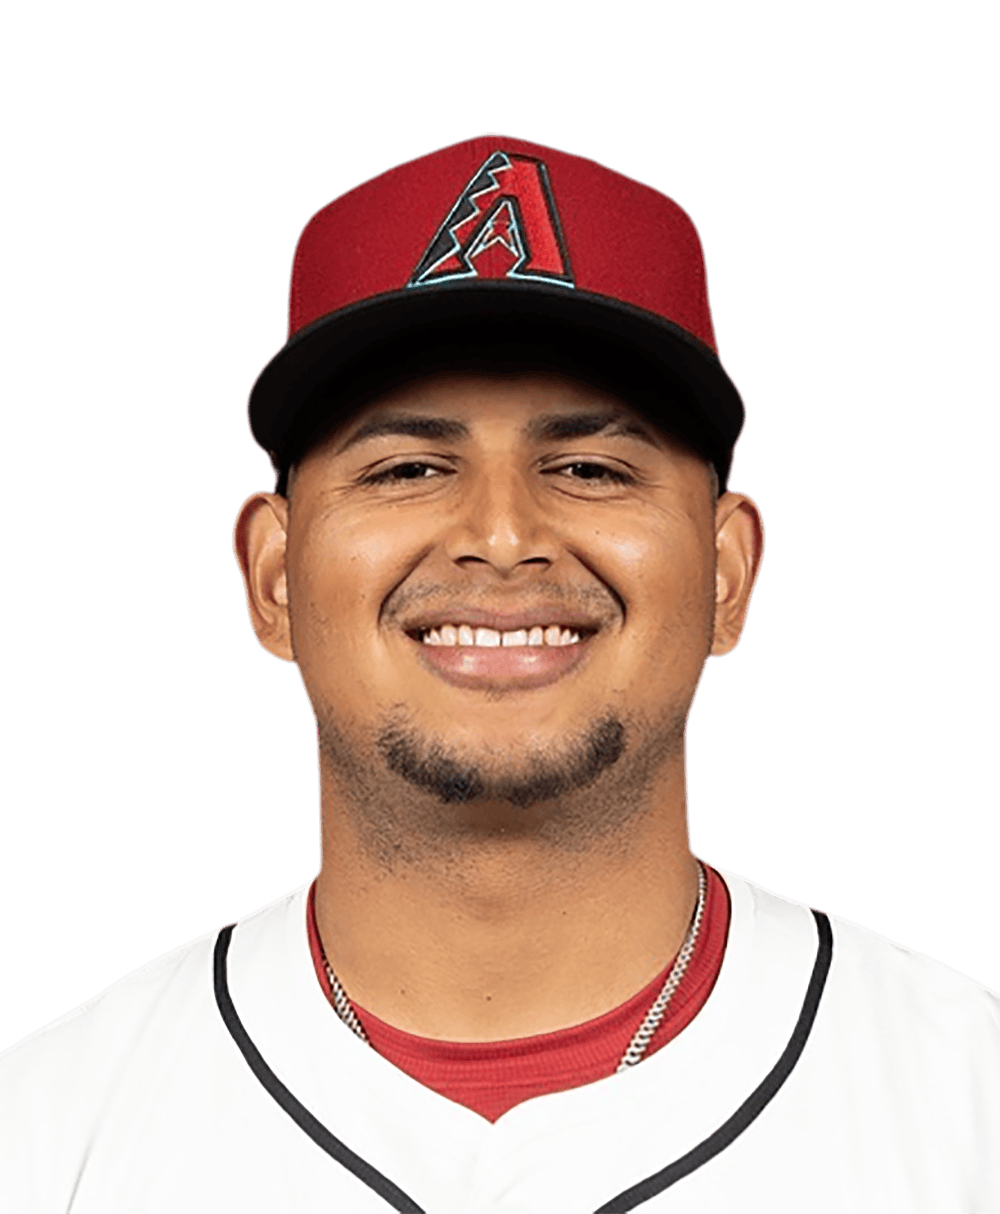 How D-backs' Gabriel Moreno went from unknown to franchise catcher